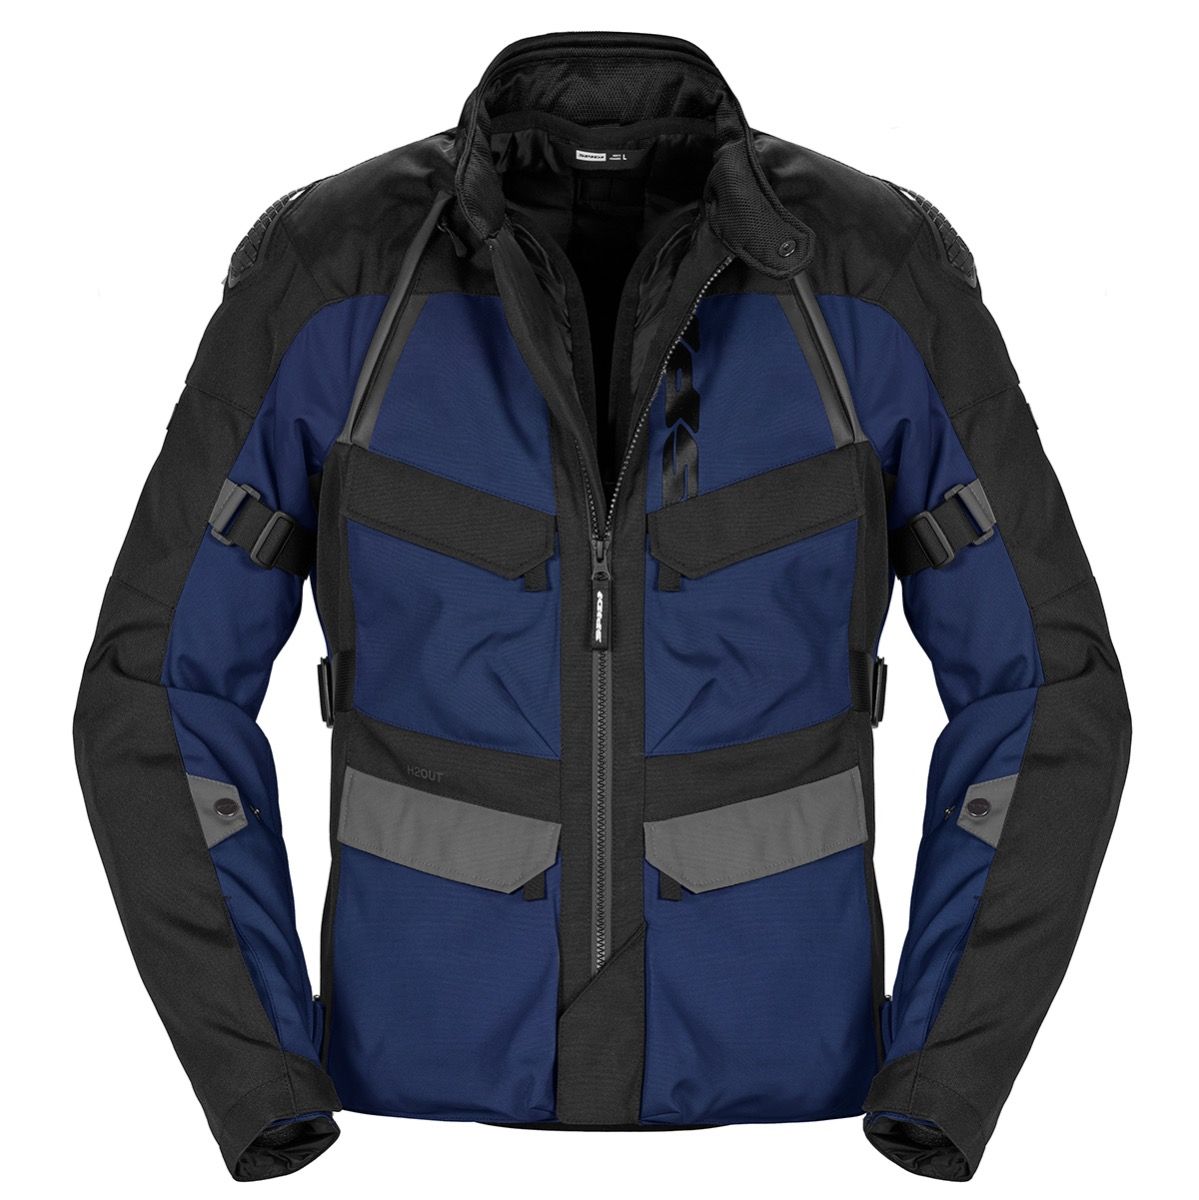 Image of Spidi Rw H2Out Jacket Black Blue Size L ID 8030161475739